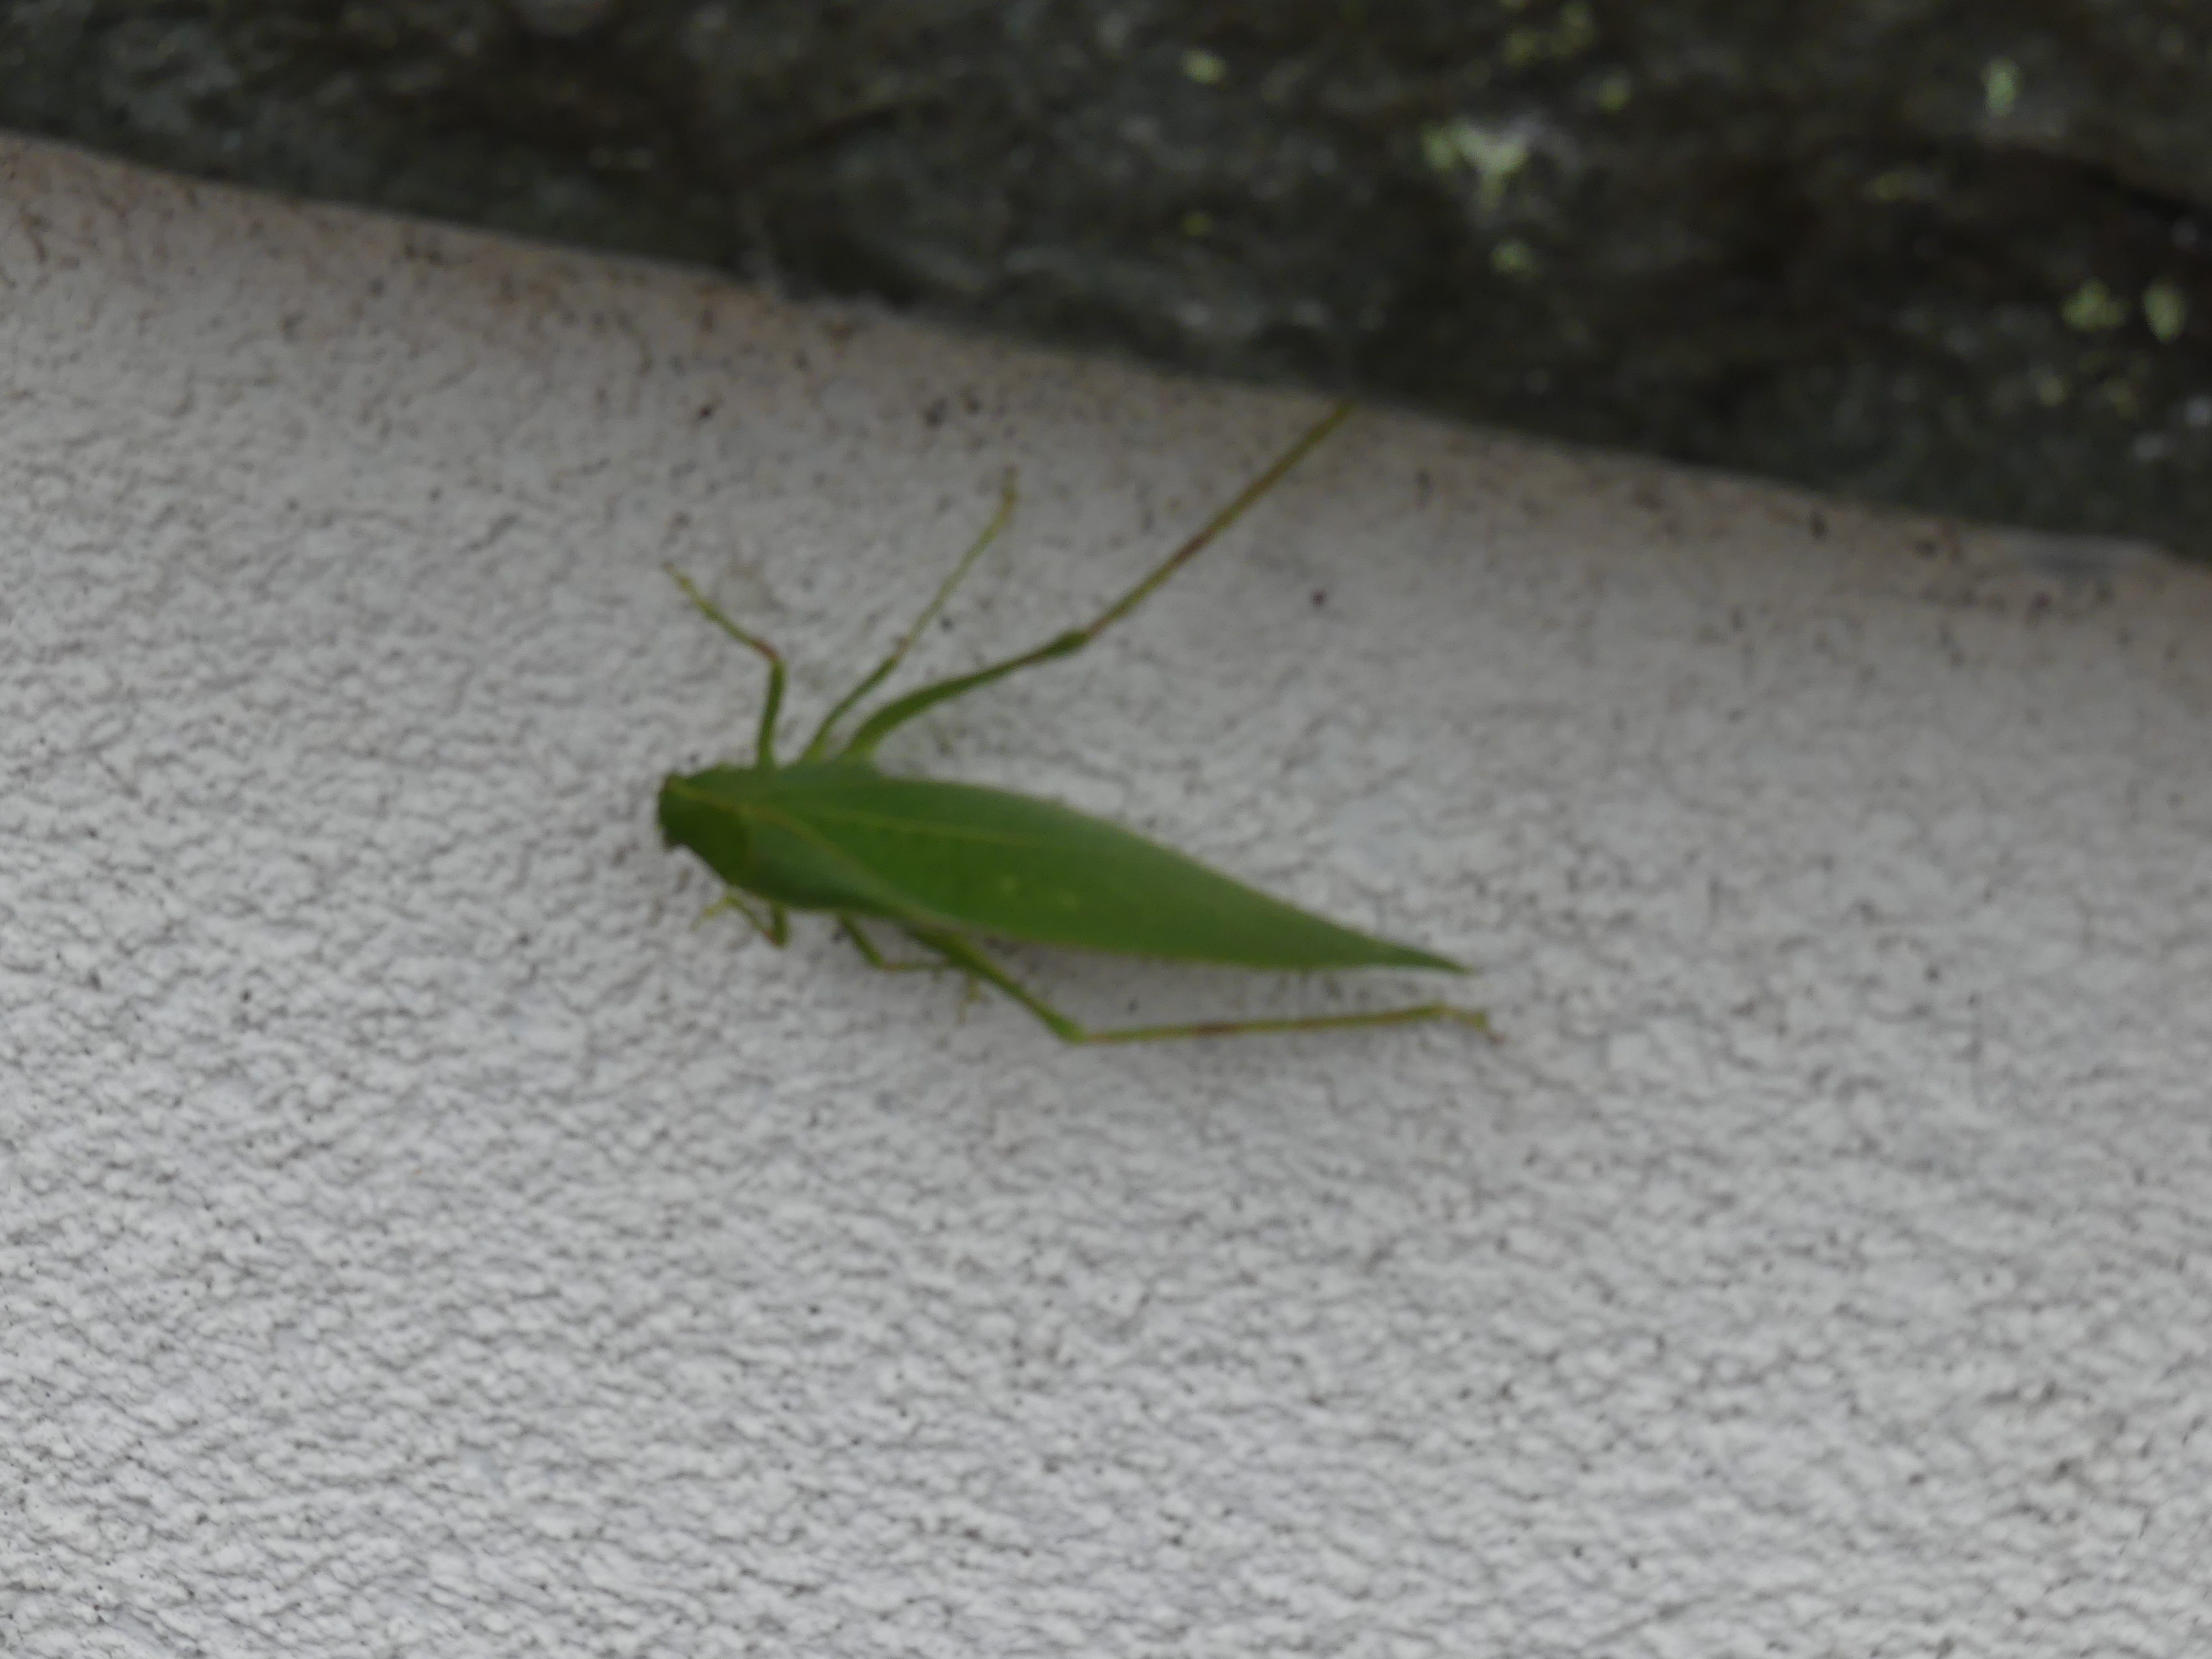 Several readers have reported seeing katydids on homes and walls and wondered if they were one of the invader insects discussed last week. They are not. They’re a variety of cricket that has just laid eggs and are at the end of their life cycle. ANDREW MESSINGER